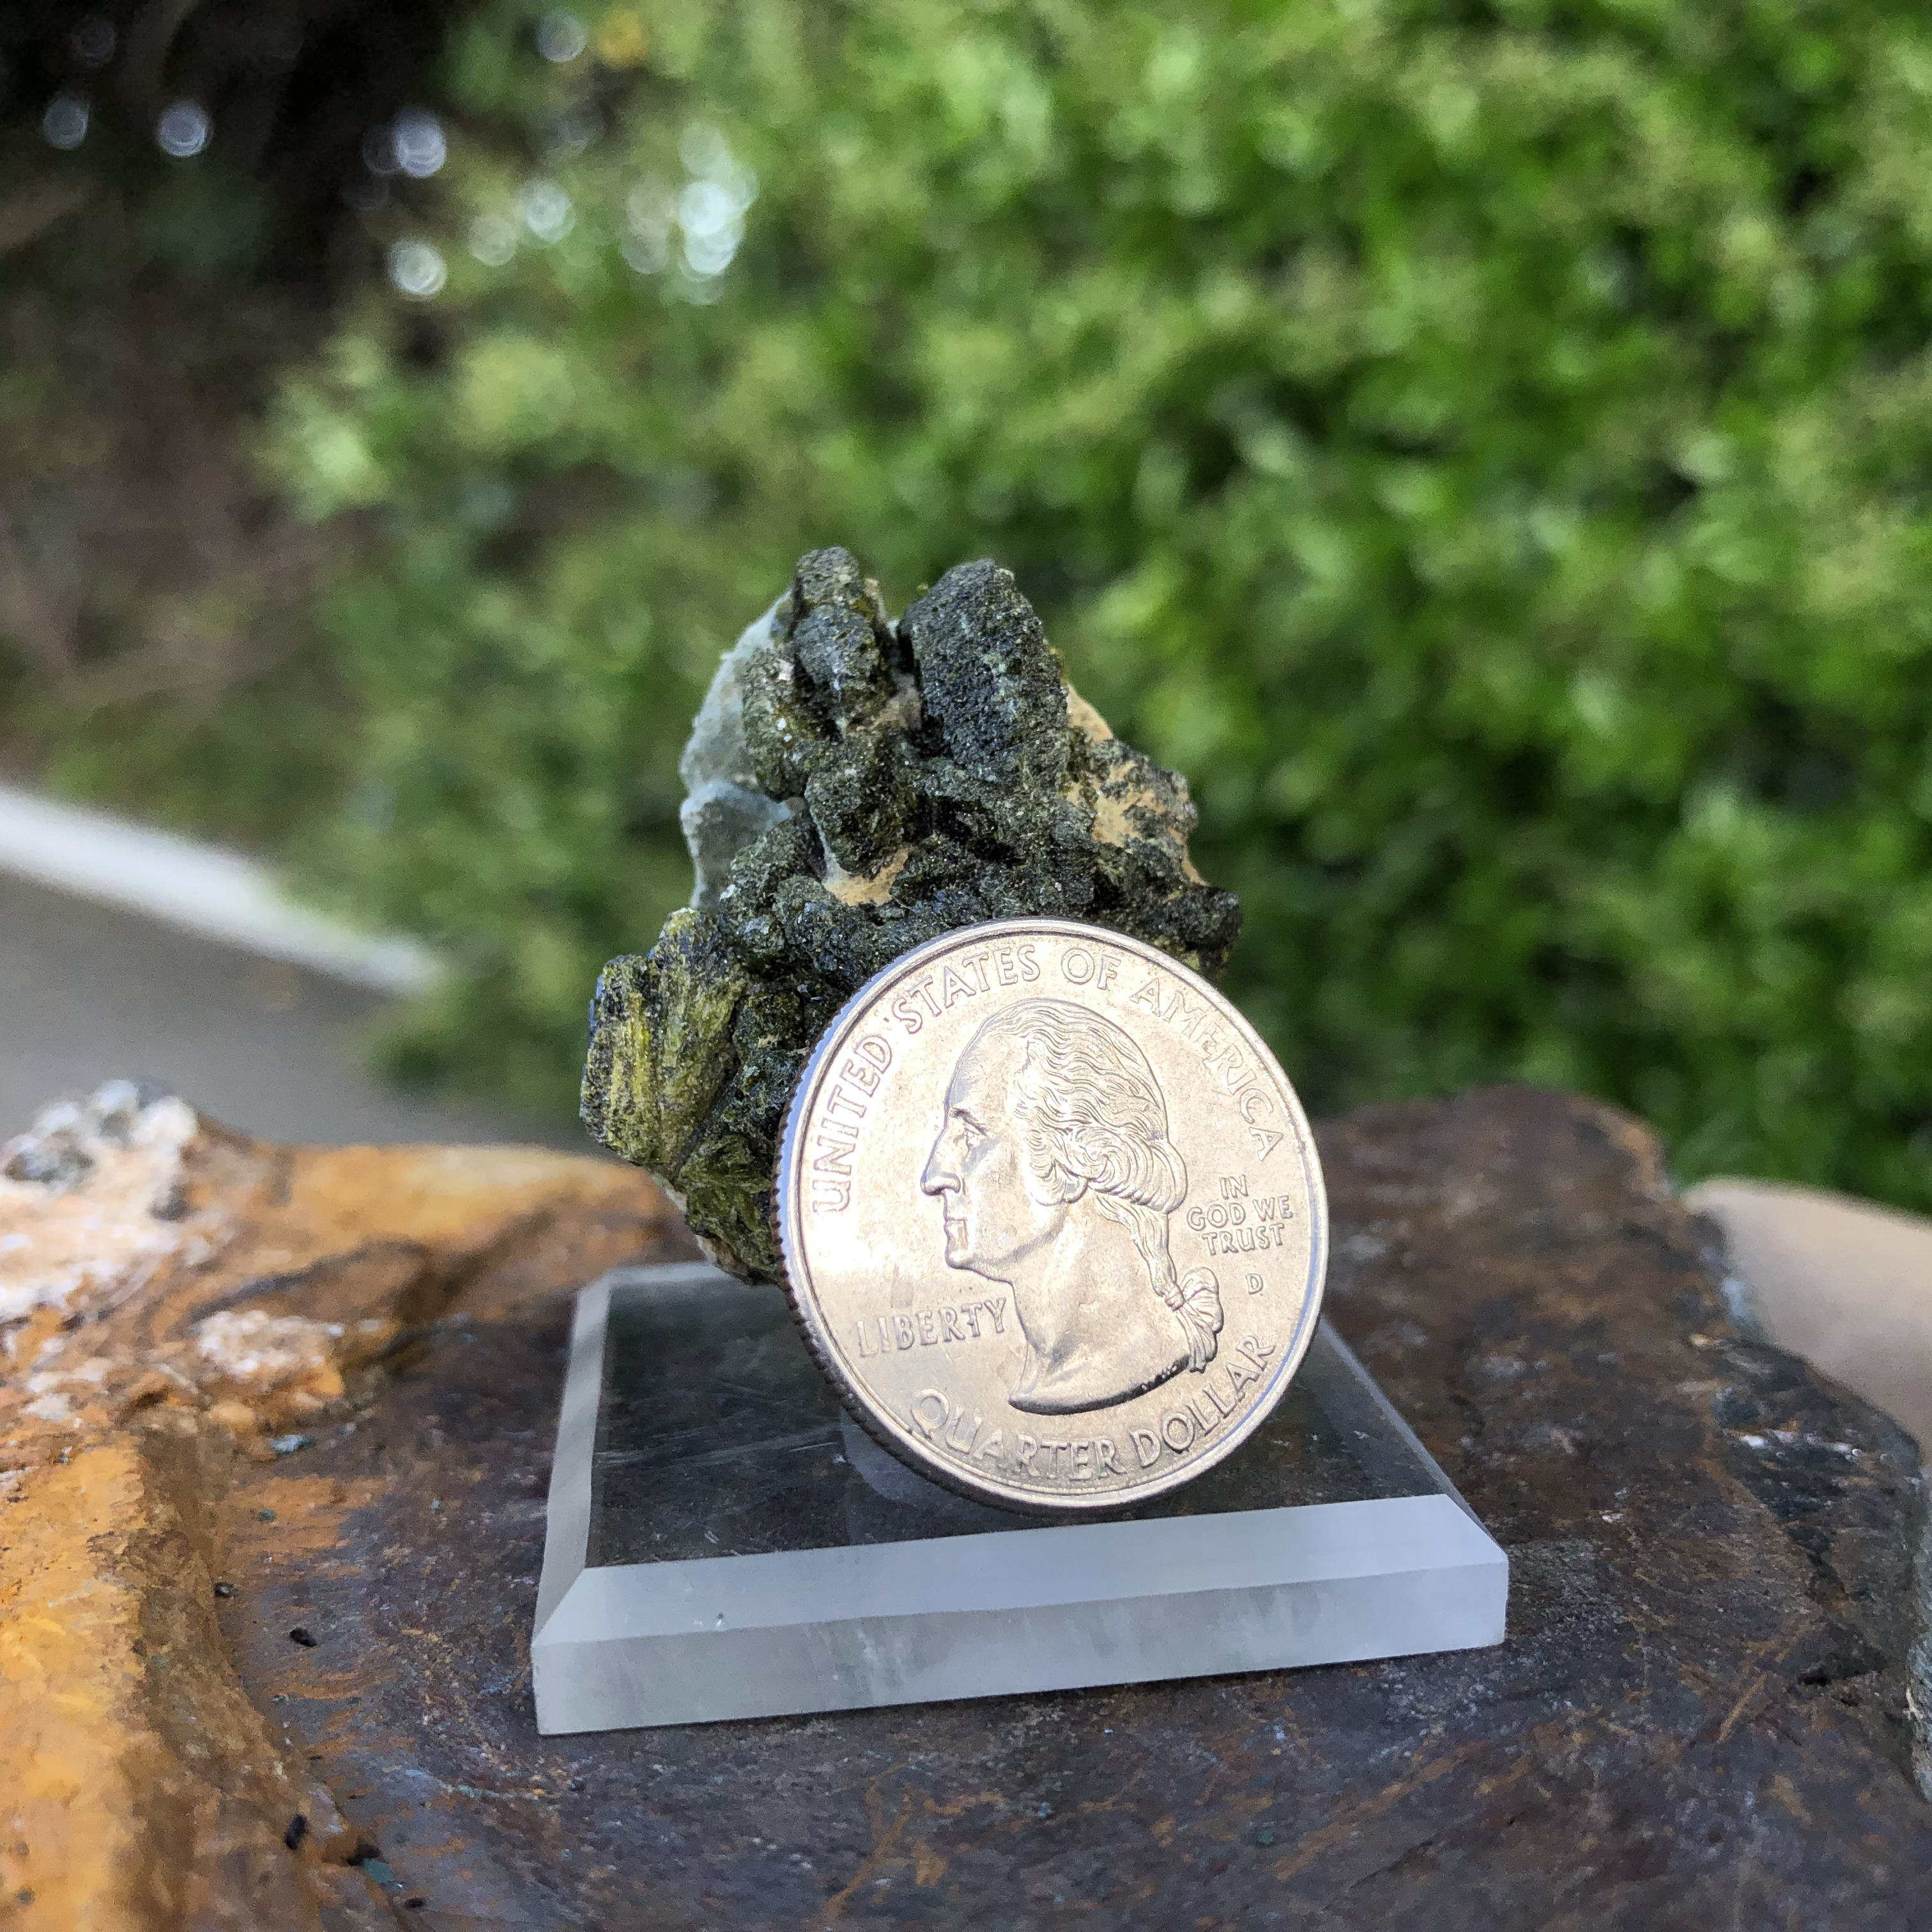 18g 4x4x2cm Green Epidote from Morocco